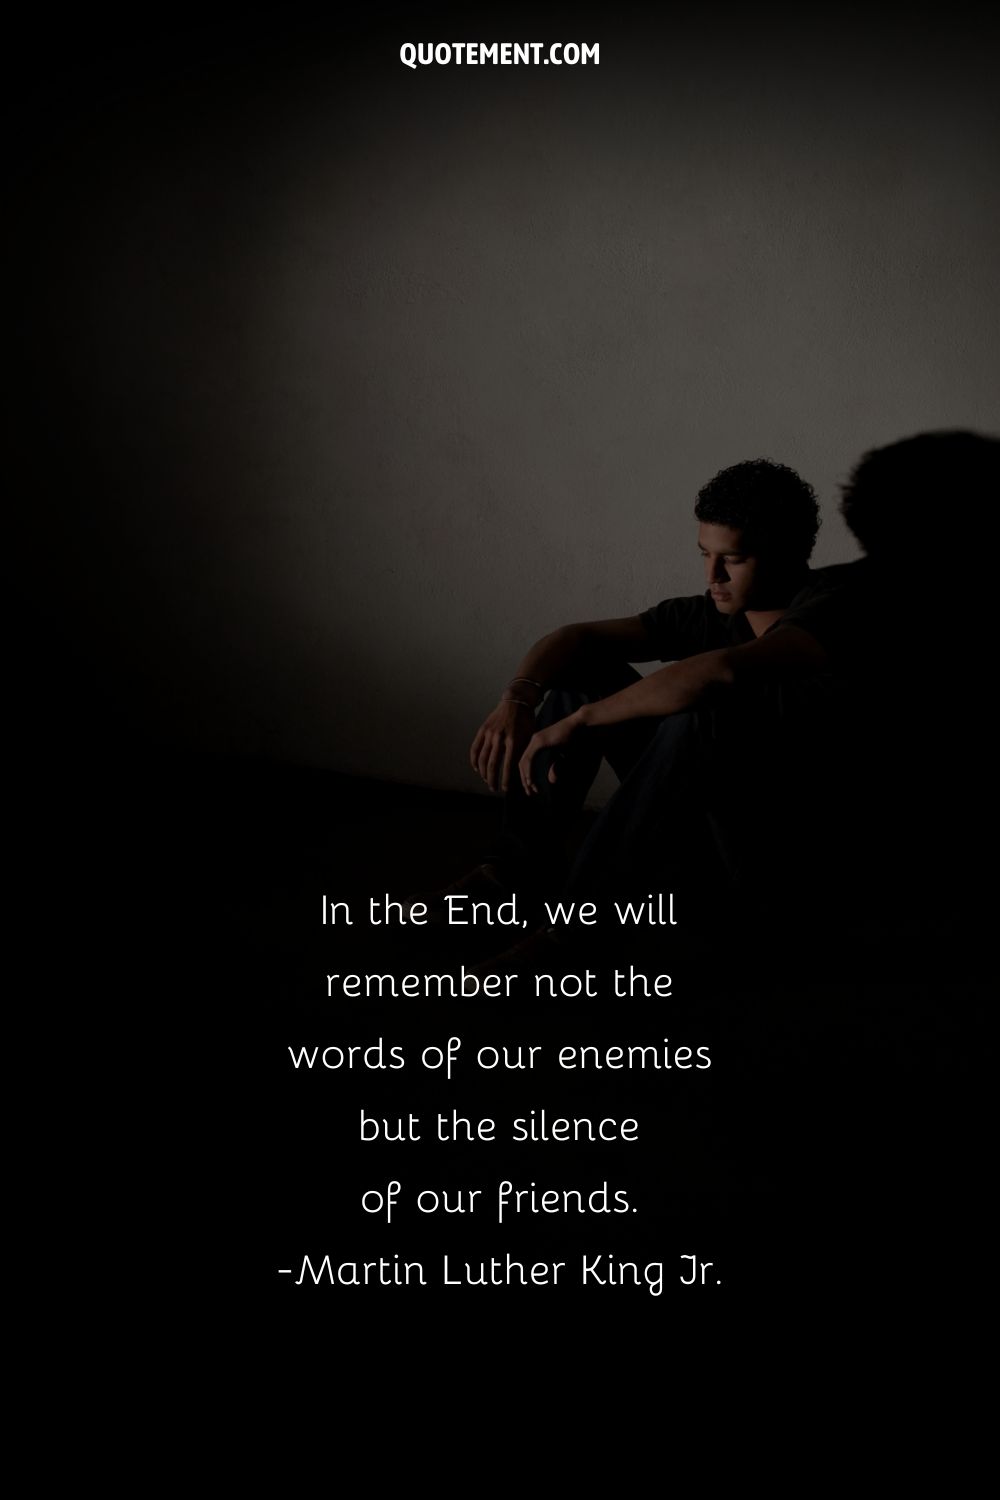 In the End, we will remember not the words of our enemies but the silence of our friends